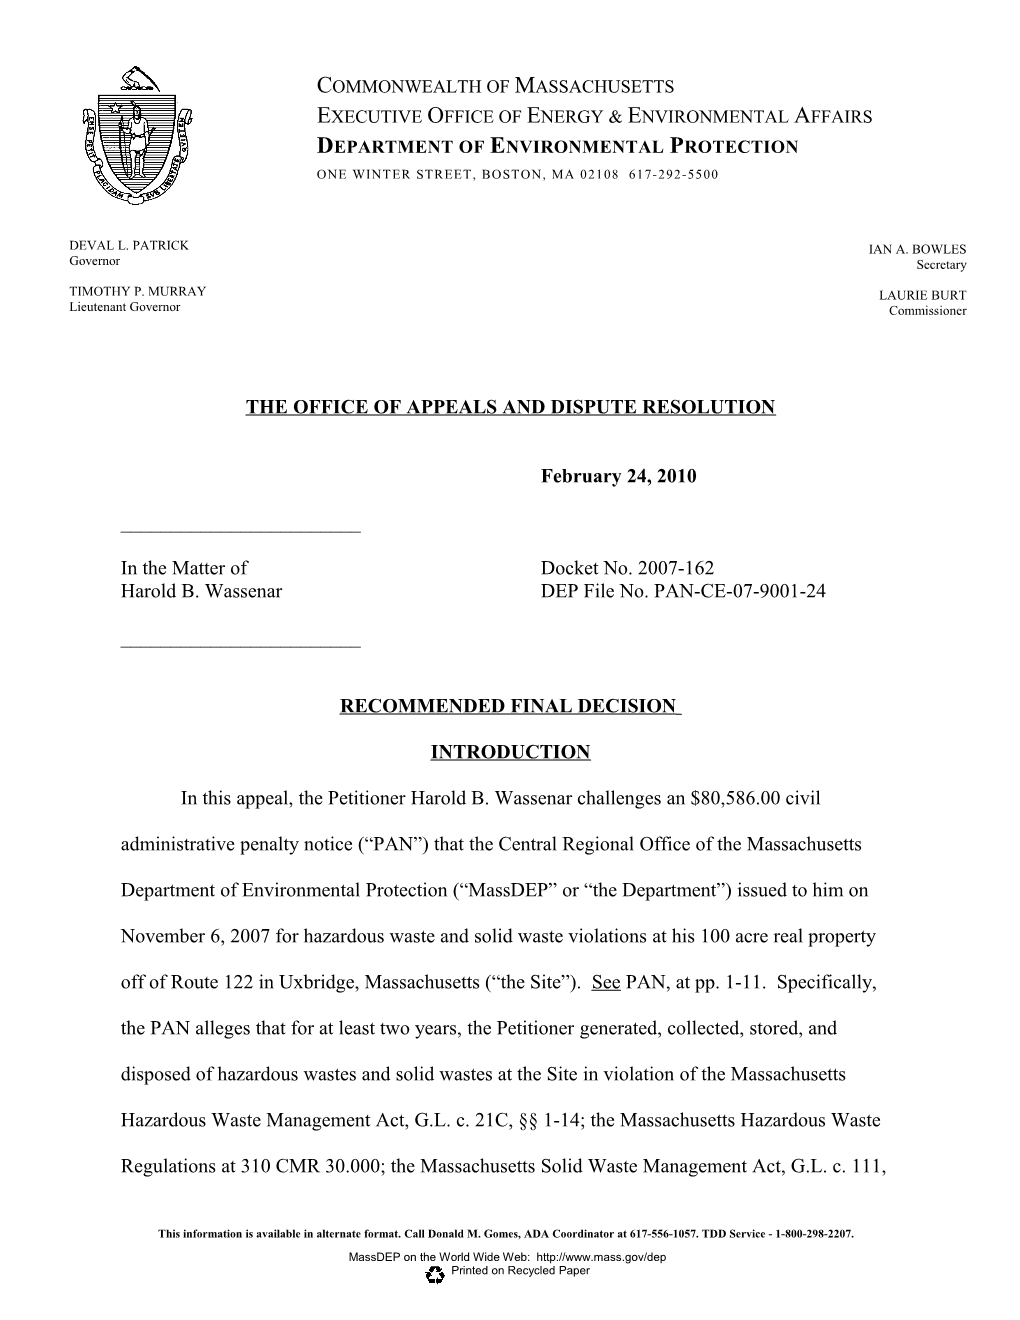 The Office of Appeals and Dispute Resolution s6